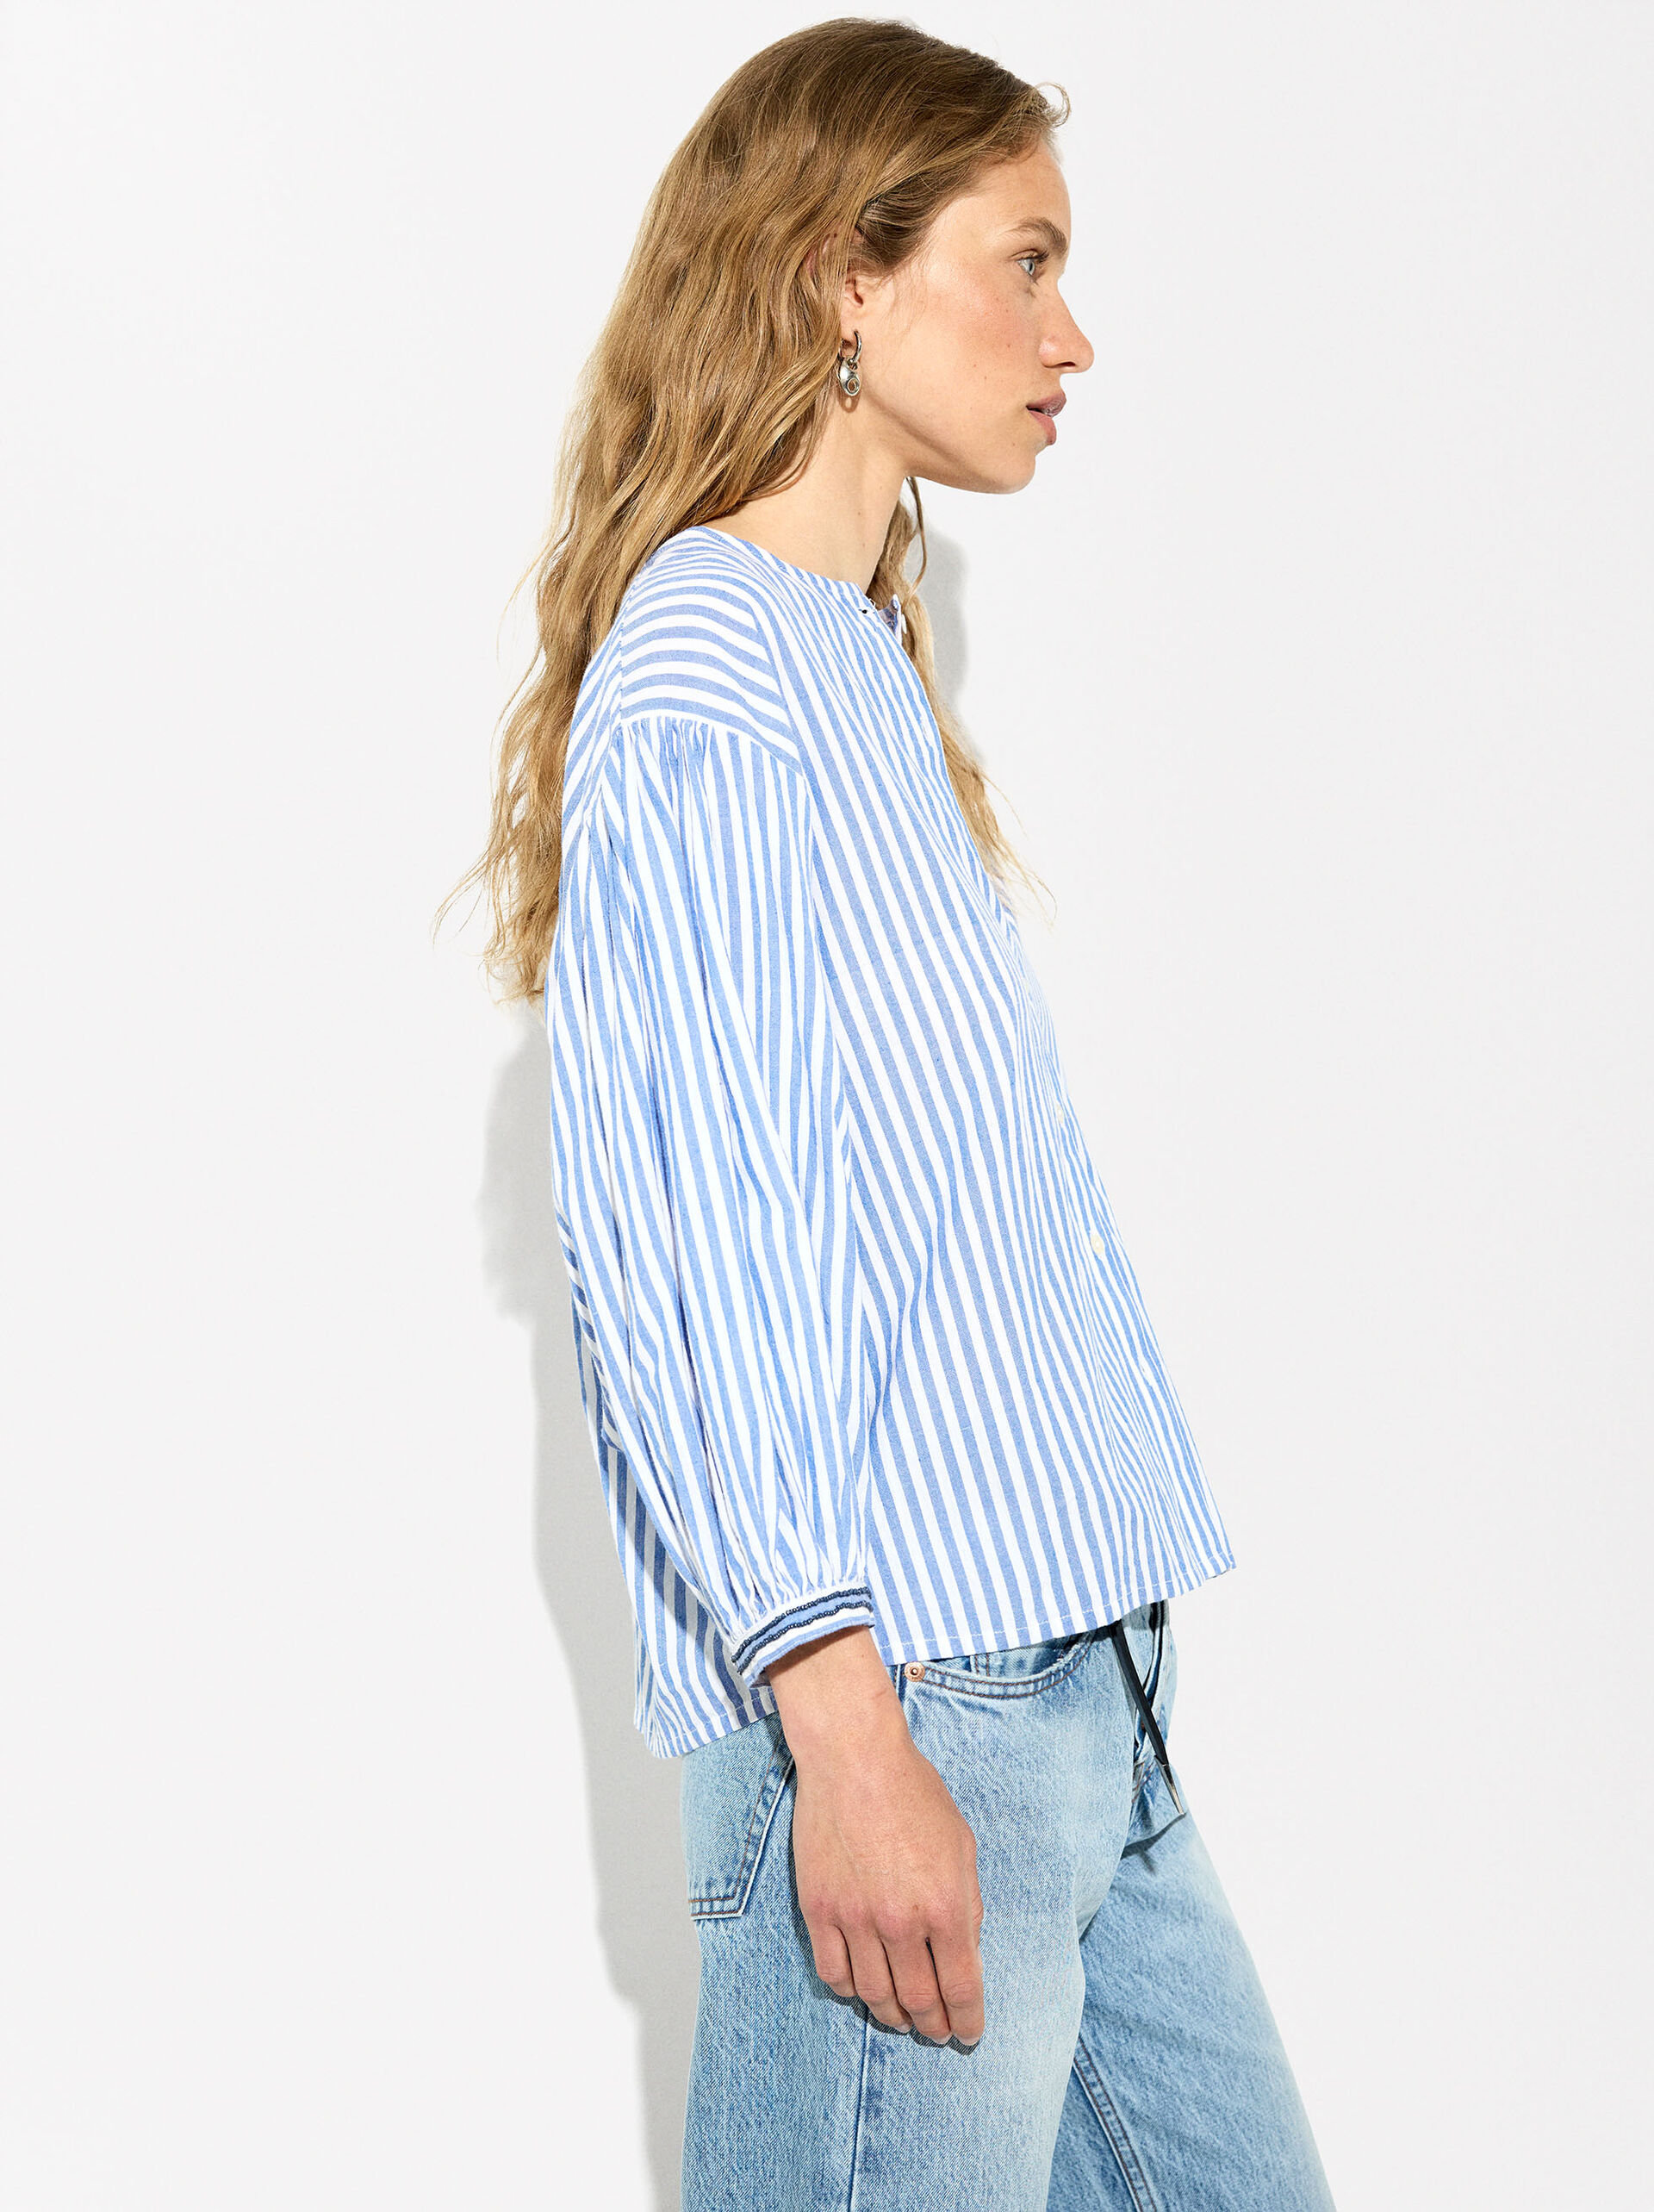 100% Cotton Striped Shirt image number 4.0